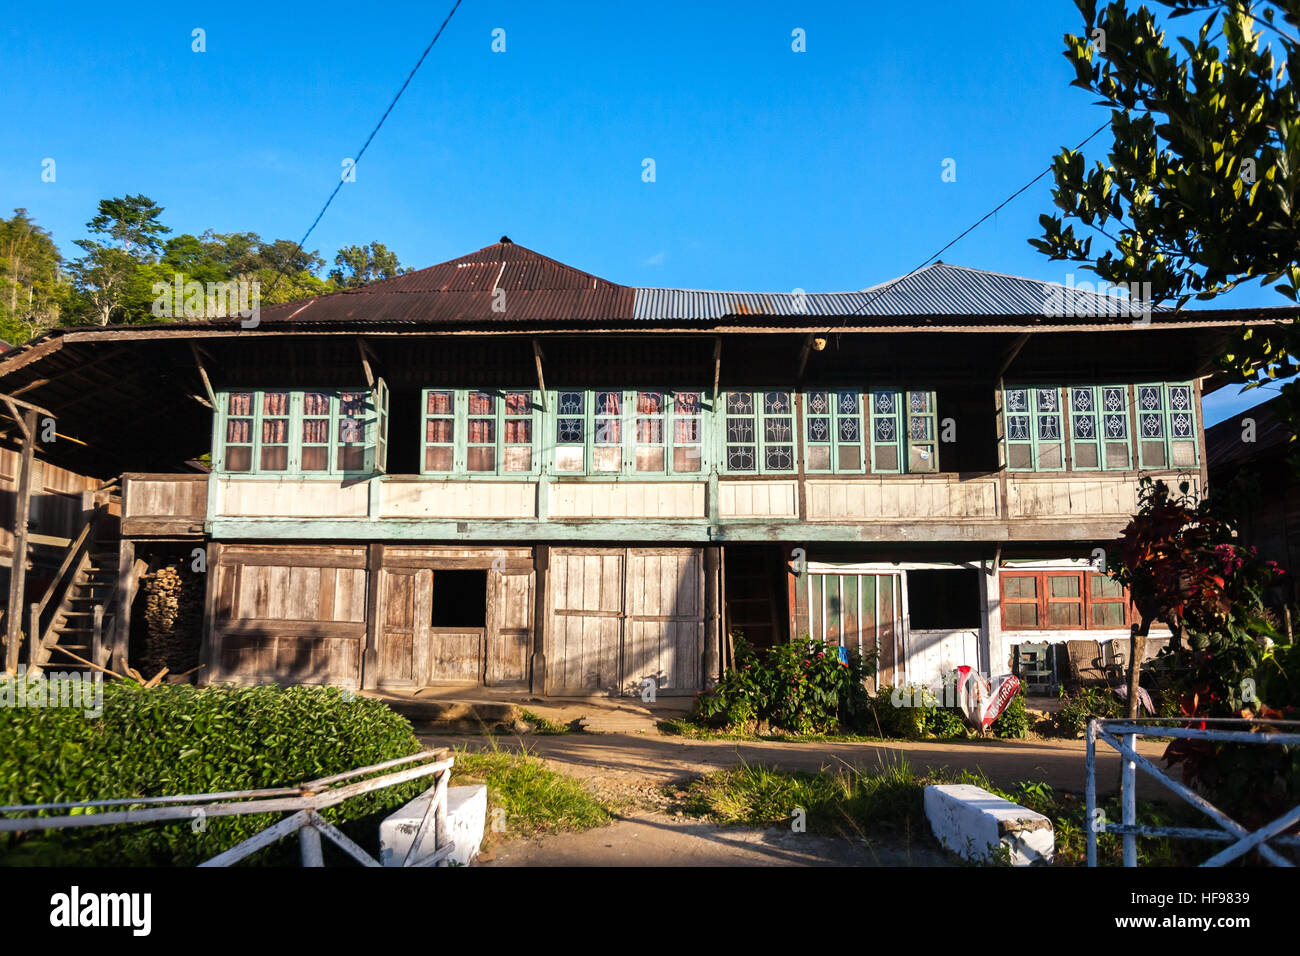 Large wooden house with malay architecture style. Stock Photo